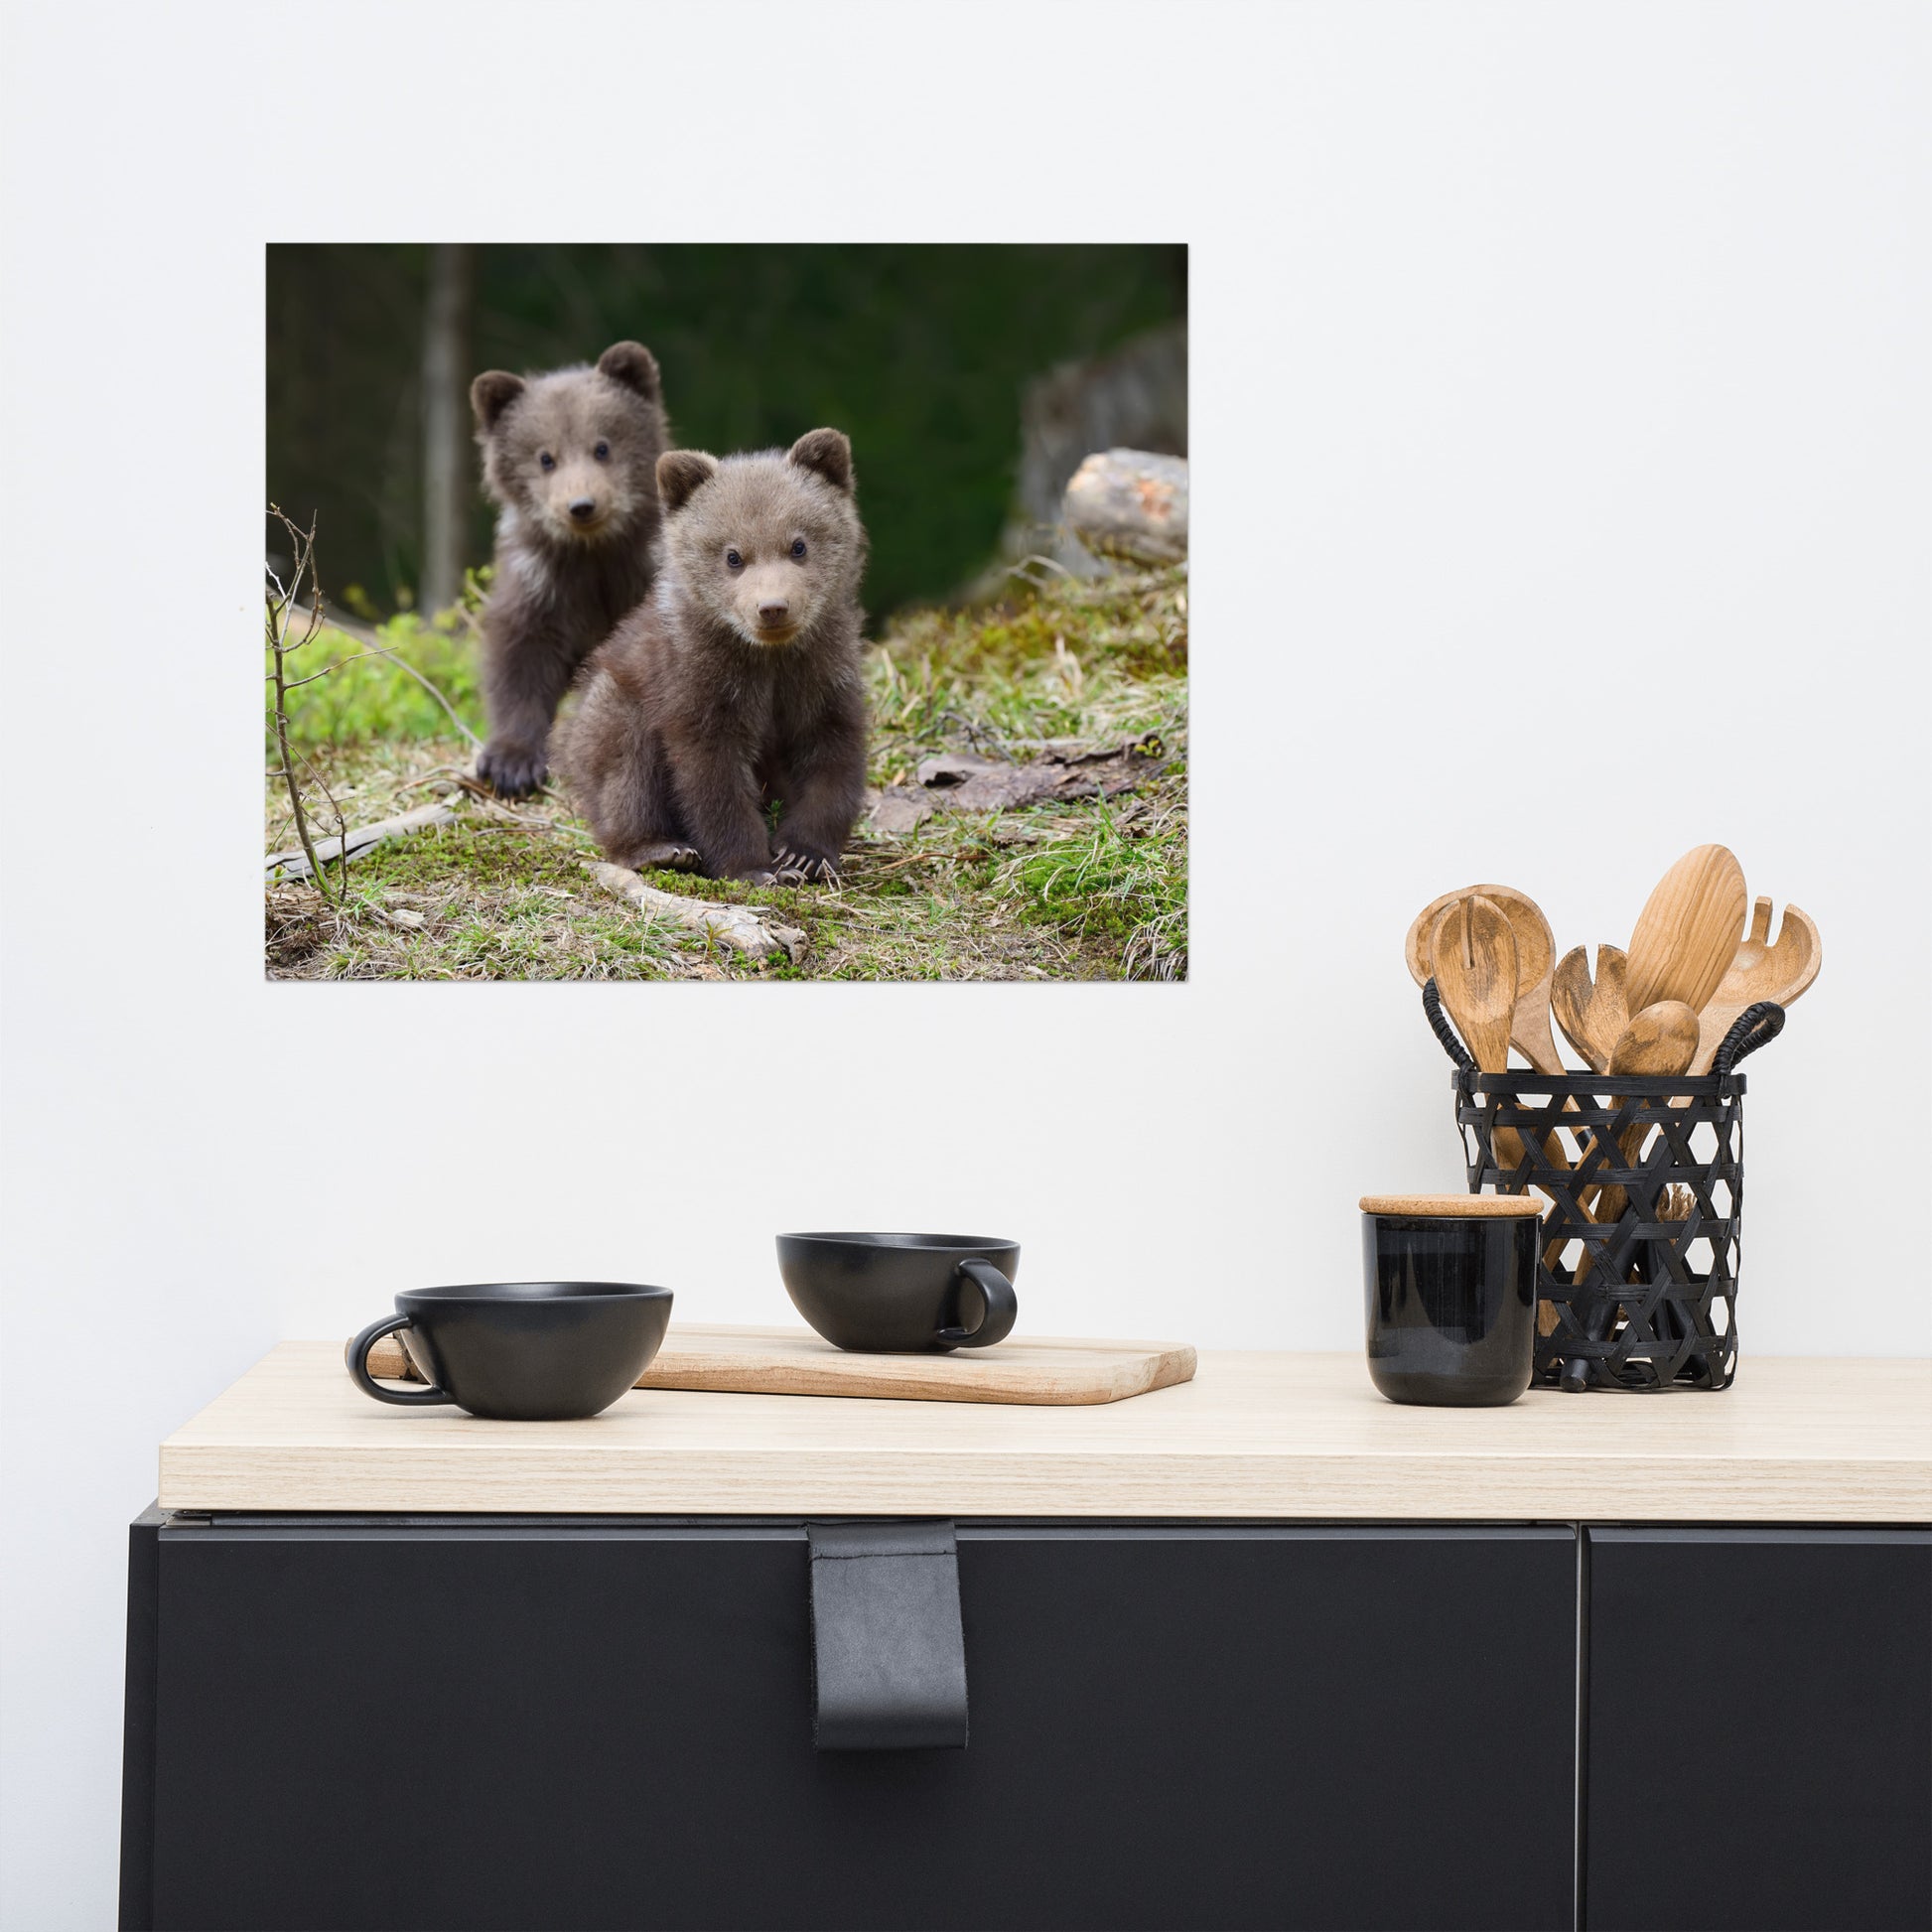 Pediatric Clinic Wall Decor: Adorable Grizzly Bear Cubs In The Trees Animal / Wildlife / Nature Photograph - Loose / Unframed / Frameable / Frameless Wall Art Print / Artwork